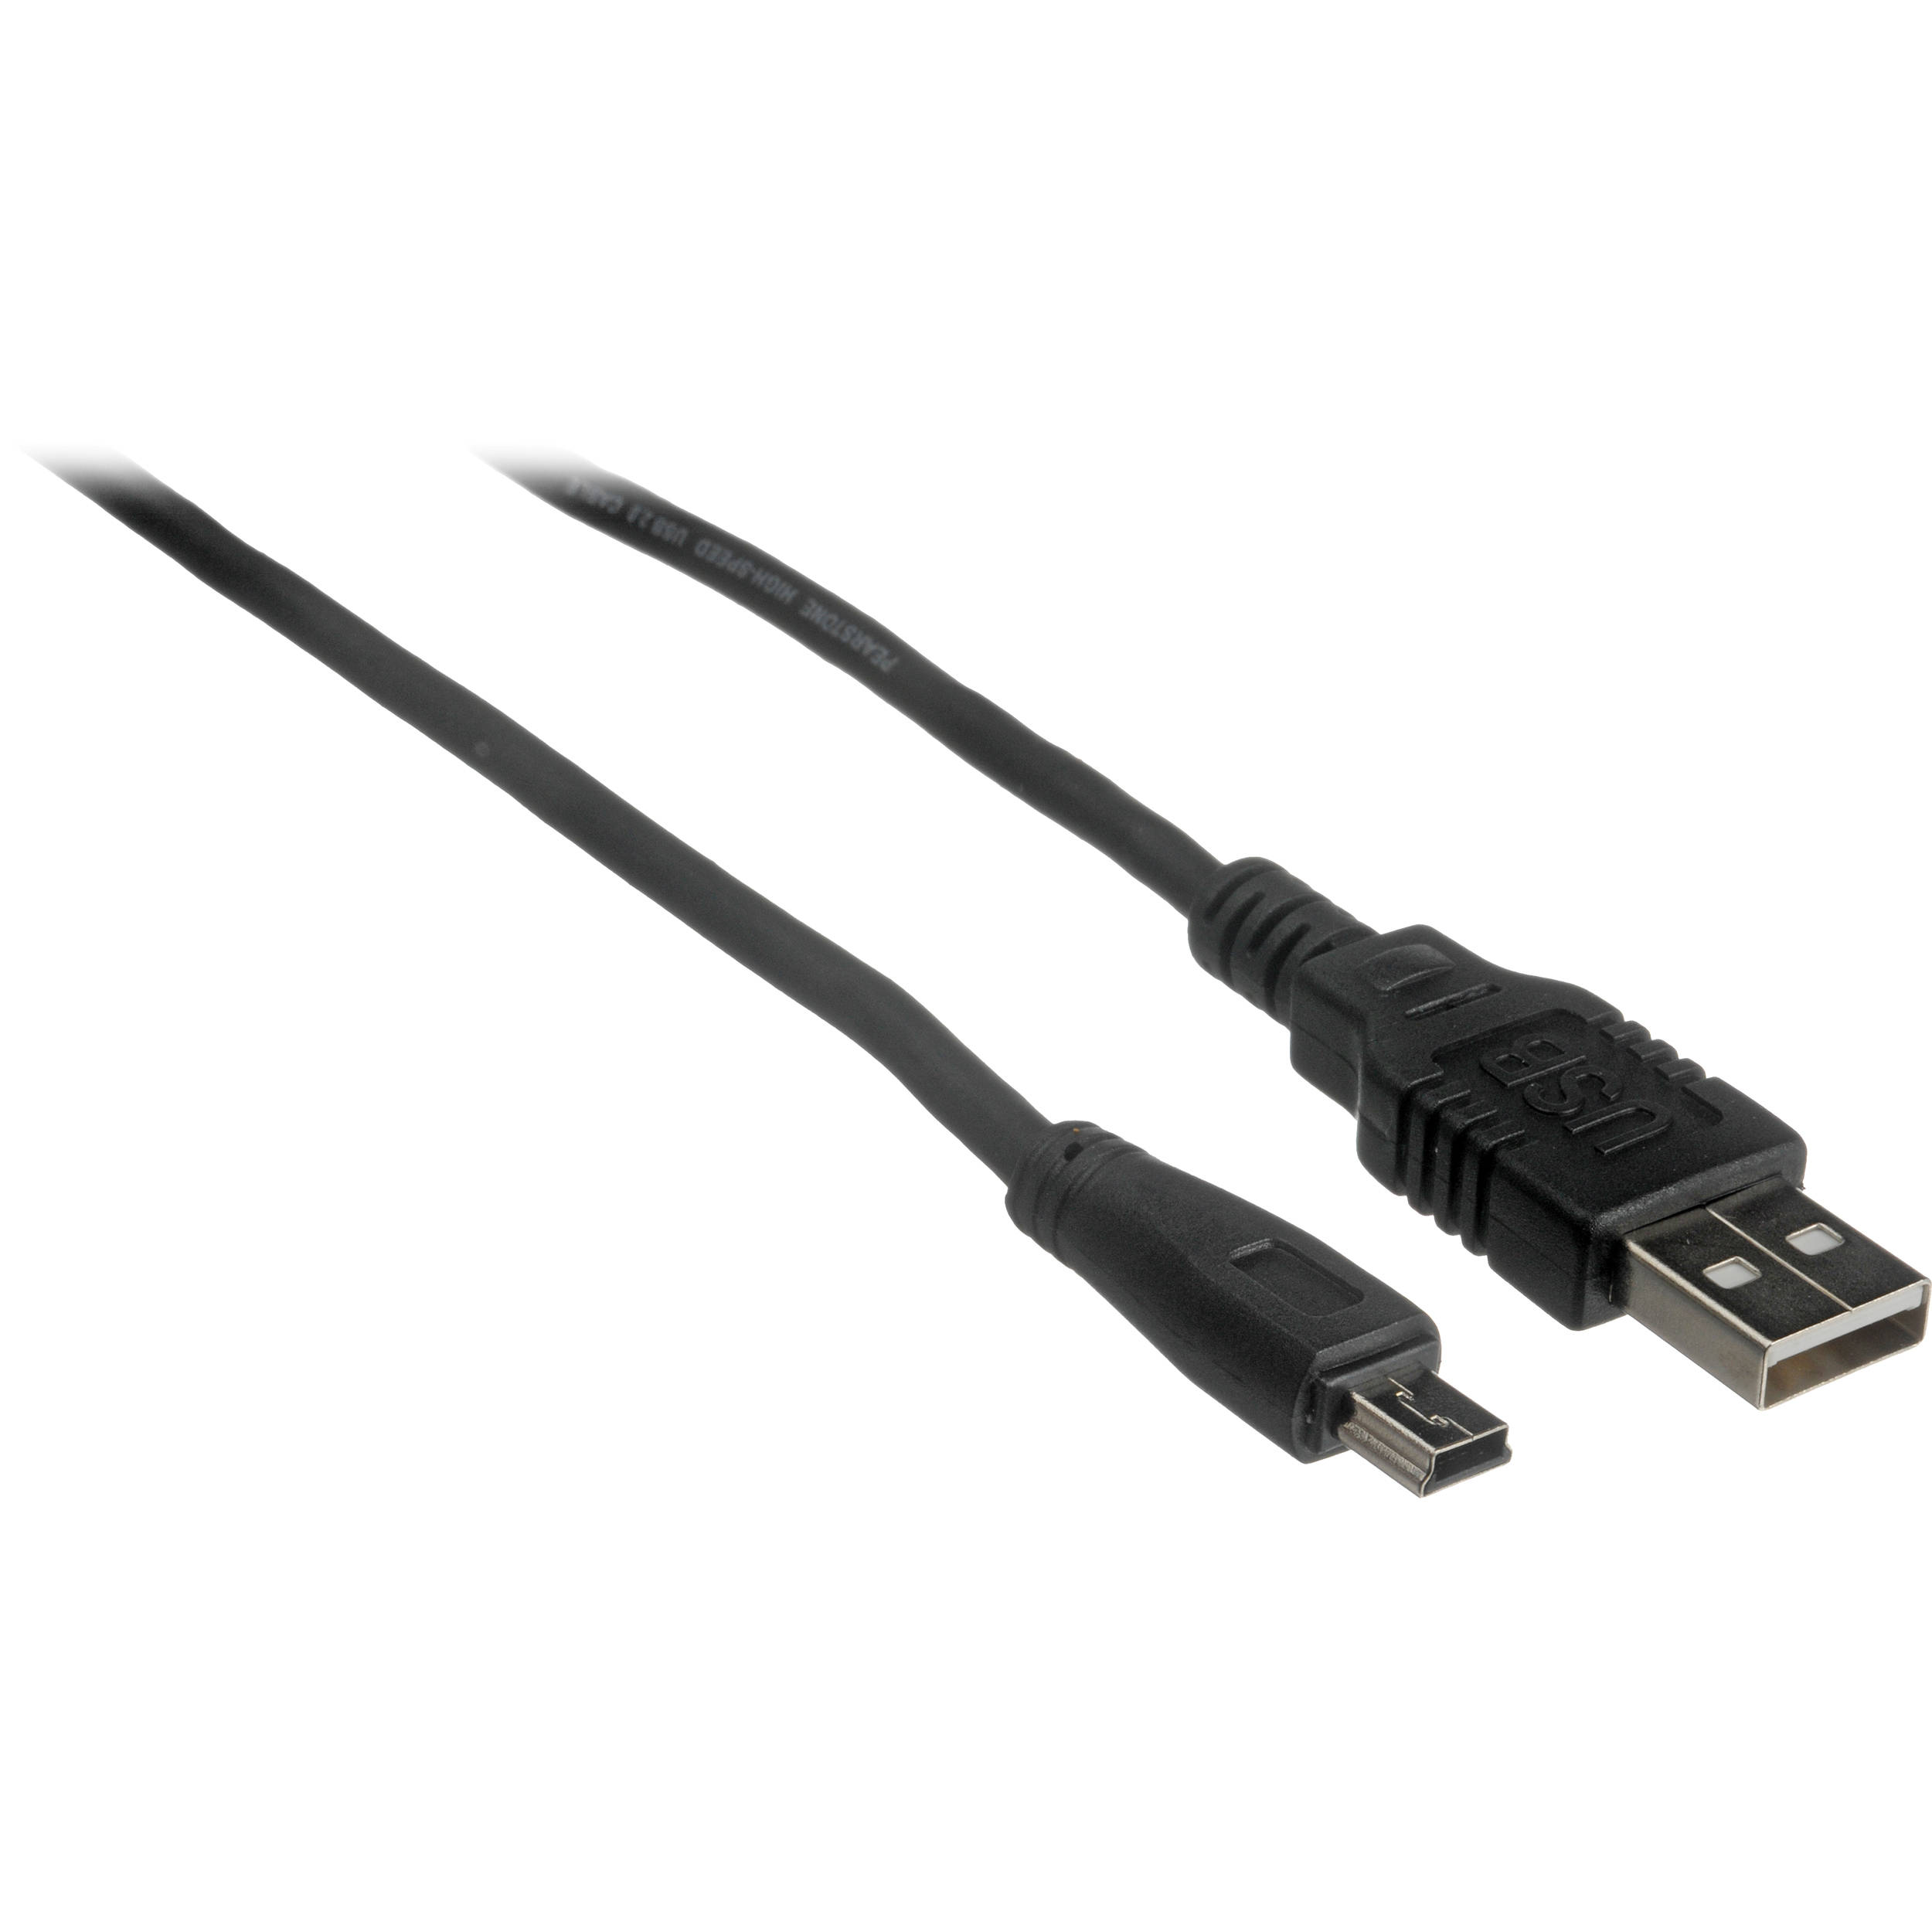 Pearstone Usb 2 0 Type A Male To Type B Mini Male Cable